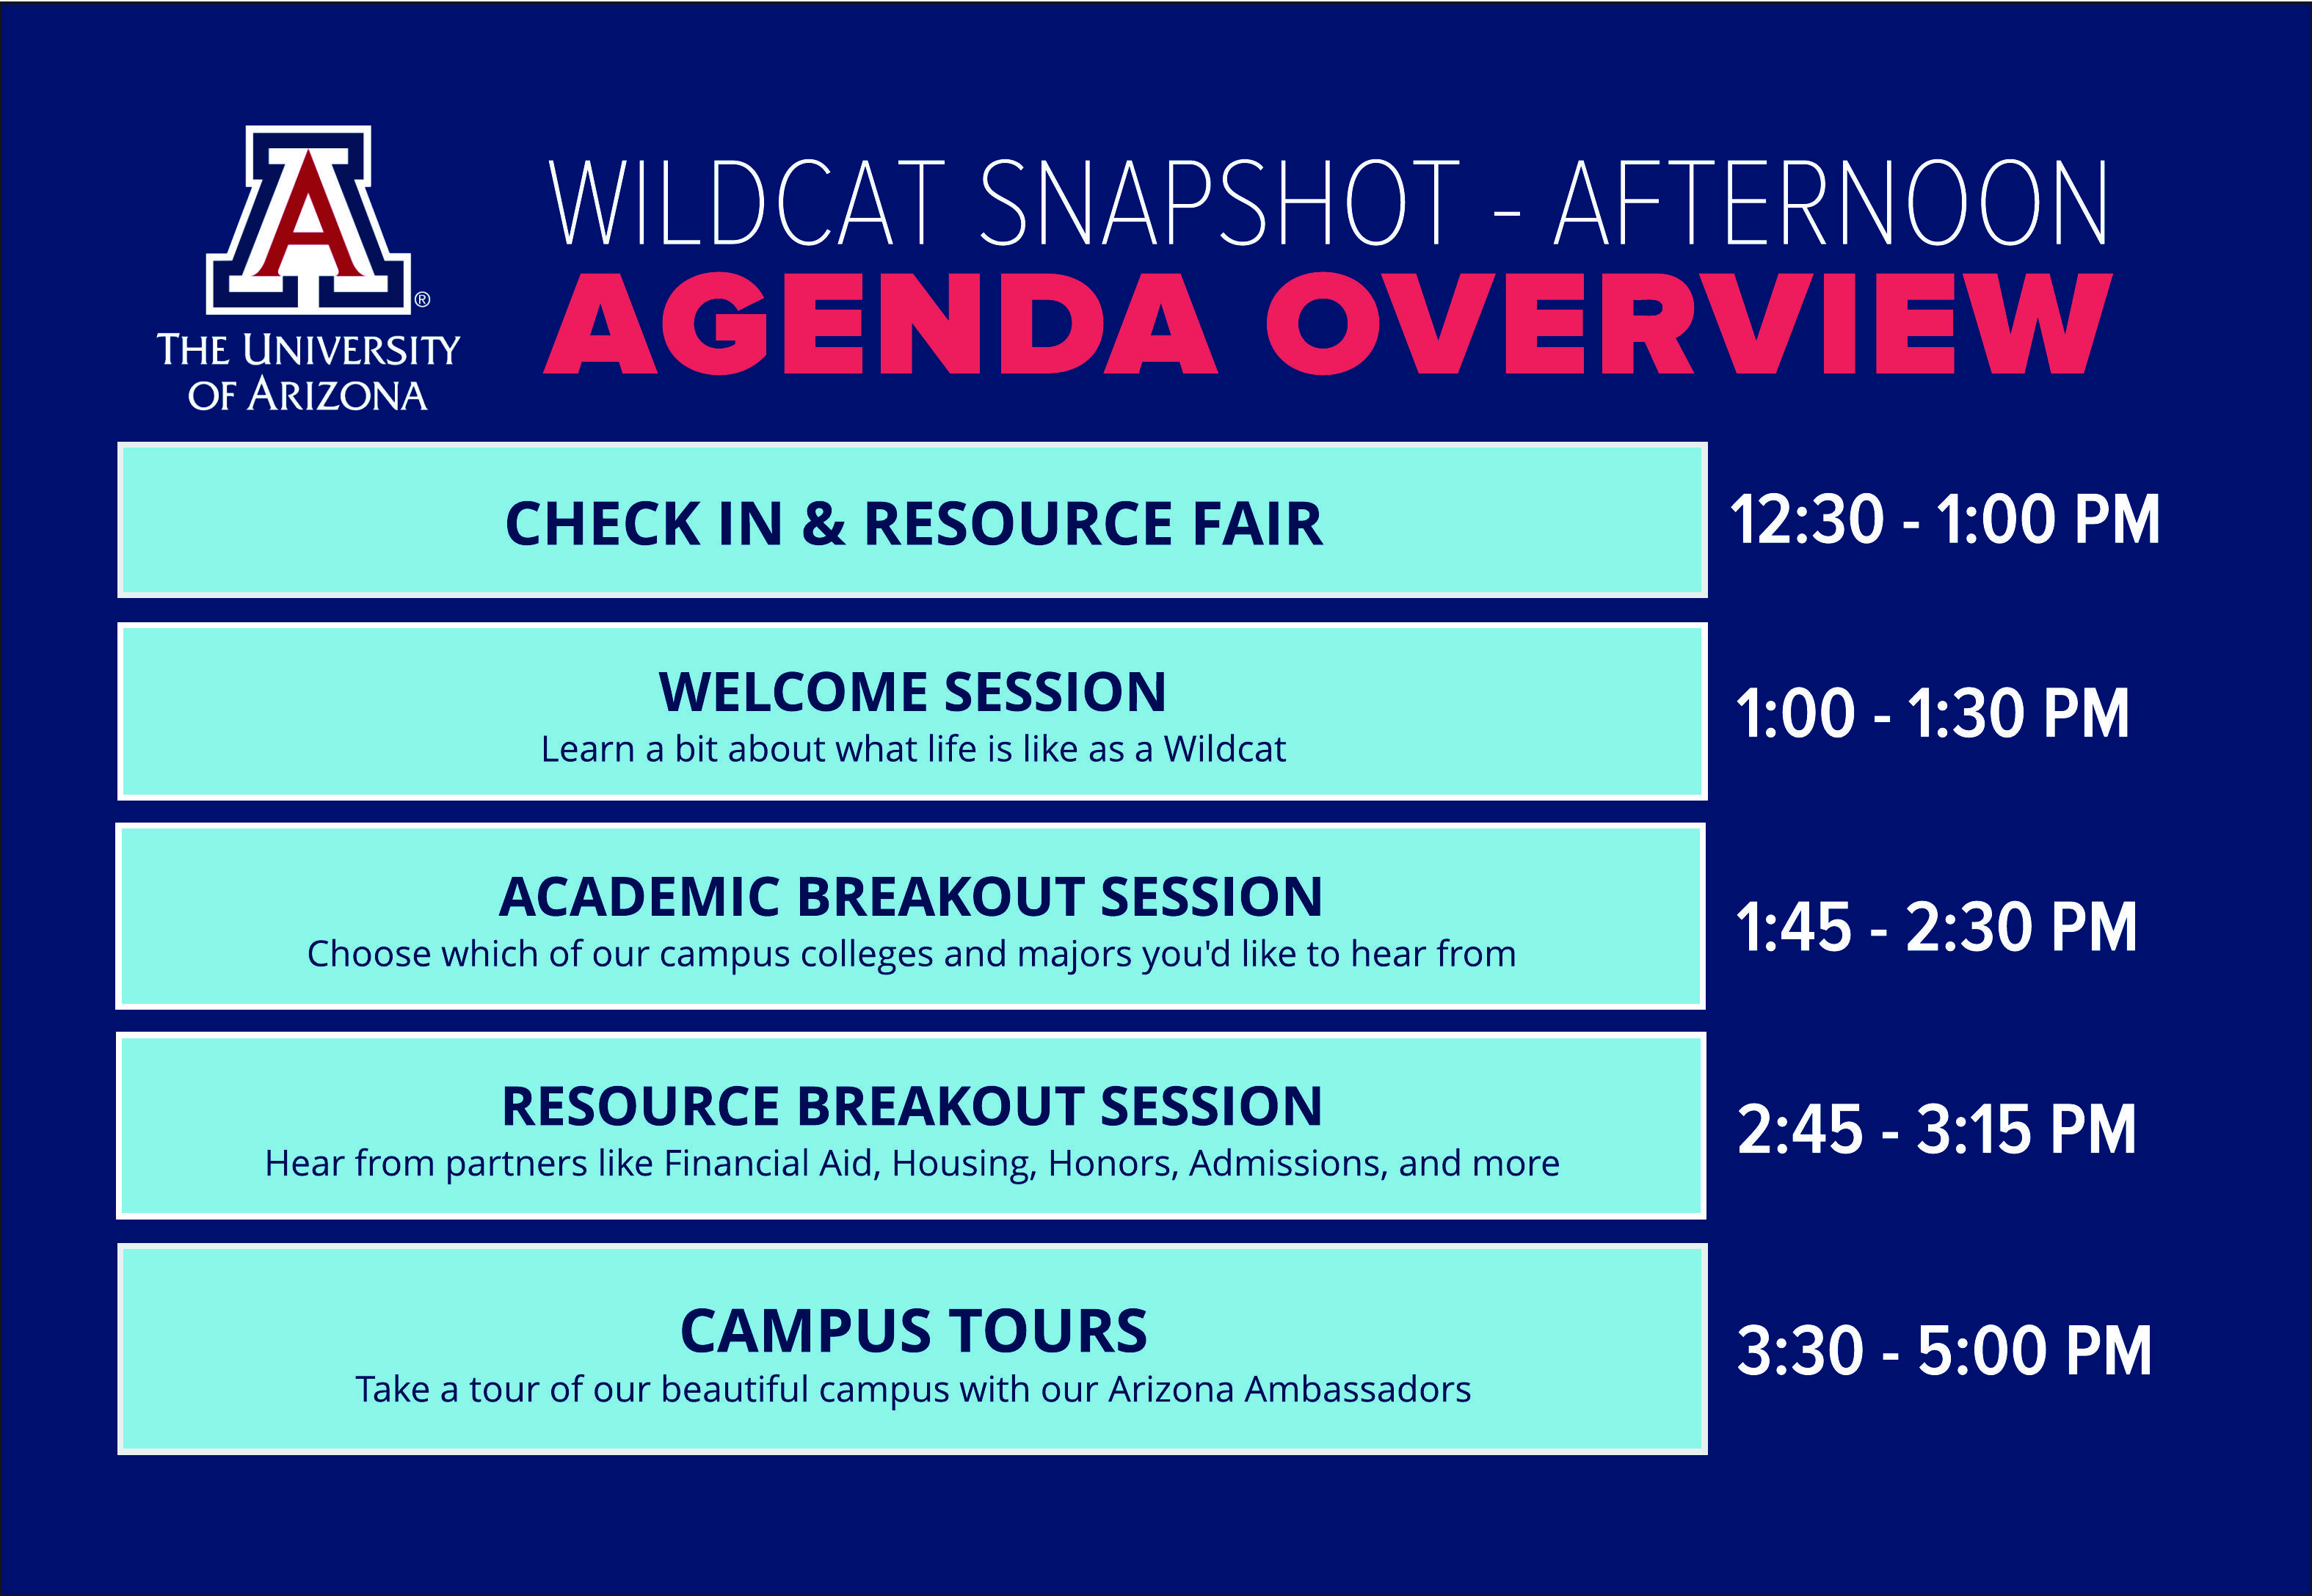 THE UNIVERSITY OF ARIZONA WILDCAT SNAPSHOT - AFTERNOON AGENDA OVERVIEW CHECK-IN & RESOURCE FAIR 11:30 - 1:00 PM WELCOME SESSION Learn a bit about what life is like as a Wildcat 1:00 -1:30 PM ACADEMIC BREAKOUT SESSION Choose which of our campus colleges and majors you'd like to hear from 1:45 - 2:30 PM RESOURCE BREAKOUT SESSION Hear from partners like Financial Aid, Housing, Honors, Admissions, and more 2:45 - 3:15 PM CAMPUS TOURS Take a tour of our beautiful campus with our Arizona Ambassadors 3:30 - 5:00 PM 